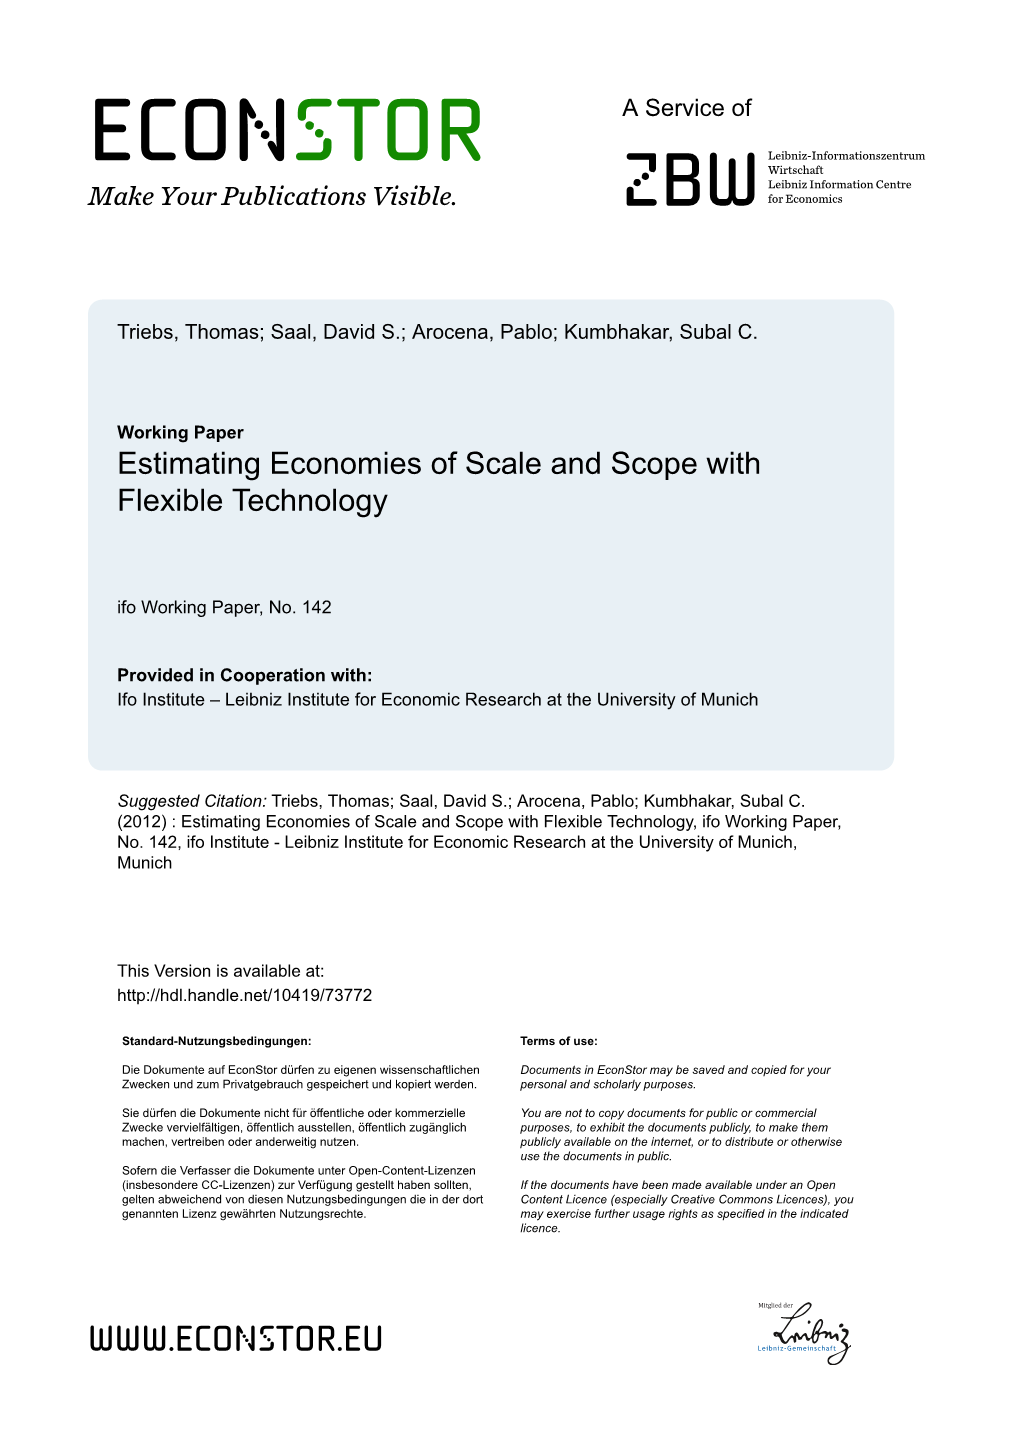 Estimating Economies of Scale and Scope with Flexible Technology